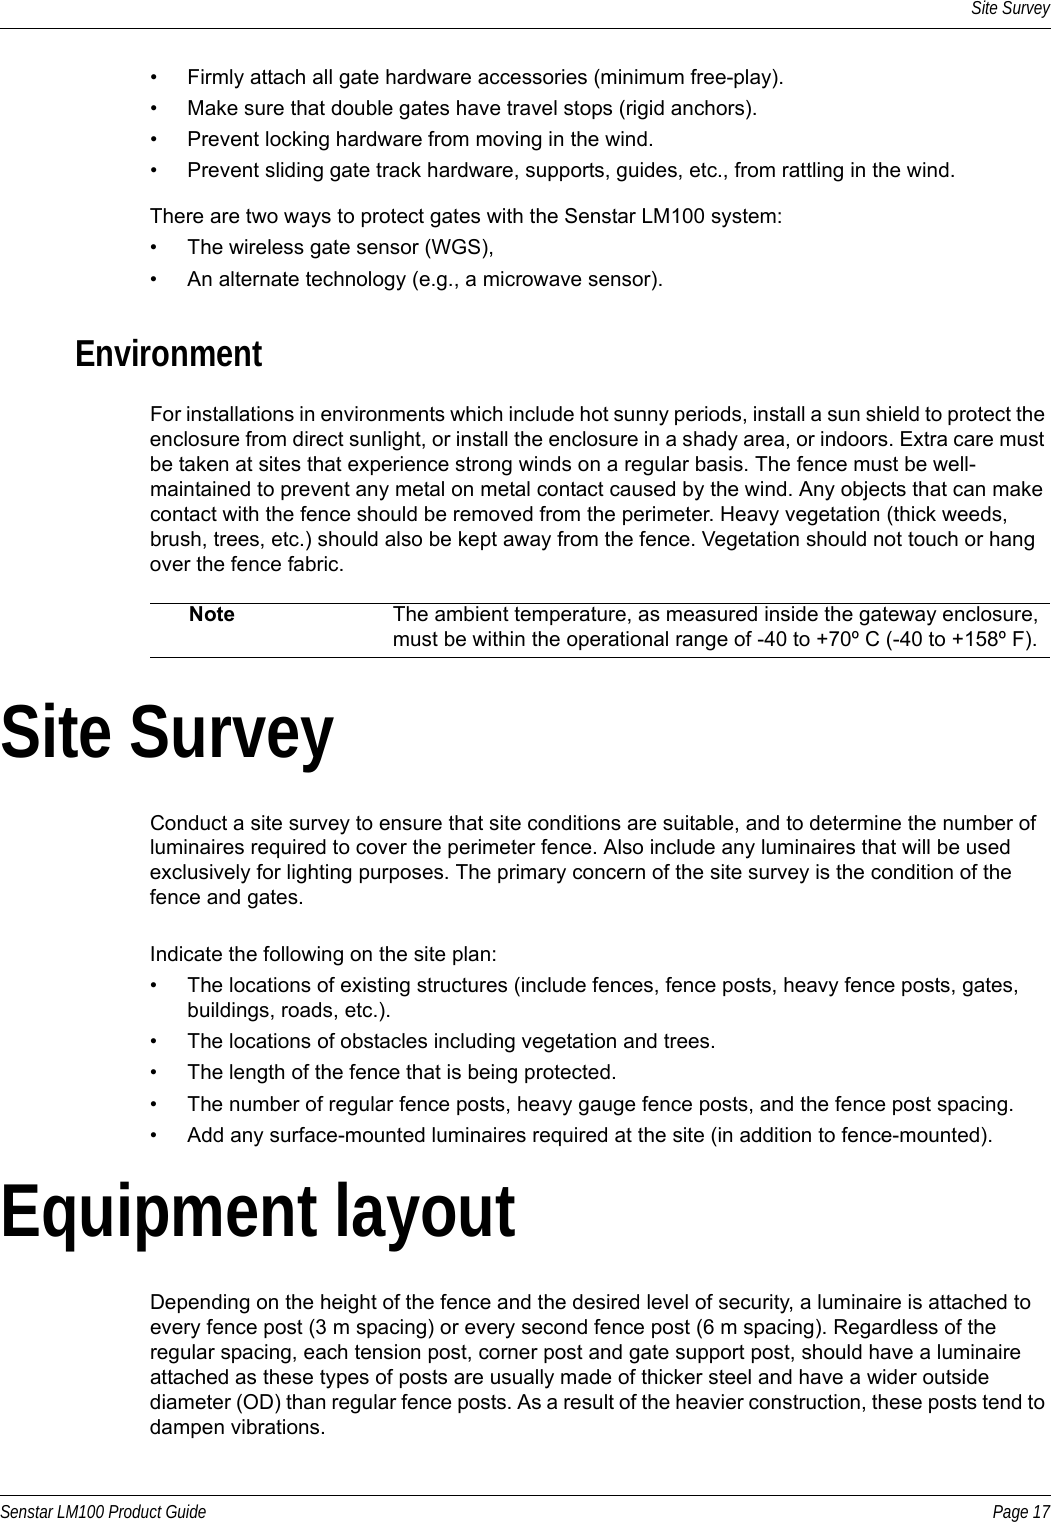 Site SurveySenstar LM100 Product Guide Page 17• Firmly attach all gate hardware accessories (minimum free-play).• Make sure that double gates have travel stops (rigid anchors).• Prevent locking hardware from moving in the wind.• Prevent sliding gate track hardware, supports, guides, etc., from rattling in the wind.There are two ways to protect gates with the Senstar LM100 system:• The wireless gate sensor (WGS),• An alternate technology (e.g., a microwave sensor).EnvironmentFor installations in environments which include hot sunny periods, install a sun shield to protect the enclosure from direct sunlight, or install the enclosure in a shady area, or indoors. Extra care must be taken at sites that experience strong winds on a regular basis. The fence must be well-maintained to prevent any metal on metal contact caused by the wind. Any objects that can make contact with the fence should be removed from the perimeter. Heavy vegetation (thick weeds, brush, trees, etc.) should also be kept away from the fence. Vegetation should not touch or hang over the fence fabric.Site SurveyConduct a site survey to ensure that site conditions are suitable, and to determine the number of luminaires required to cover the perimeter fence. Also include any luminaires that will be used exclusively for lighting purposes. The primary concern of the site survey is the condition of the fence and gates.Indicate the following on the site plan:• The locations of existing structures (include fences, fence posts, heavy fence posts, gates, buildings, roads, etc.). • The locations of obstacles including vegetation and trees.• The length of the fence that is being protected.• The number of regular fence posts, heavy gauge fence posts, and the fence post spacing.• Add any surface-mounted luminaires required at the site (in addition to fence-mounted).Equipment layoutDepending on the height of the fence and the desired level of security, a luminaire is attached to every fence post (3 m spacing) or every second fence post (6 m spacing). Regardless of the regular spacing, each tension post, corner post and gate support post, should have a luminaire attached as these types of posts are usually made of thicker steel and have a wider outside diameter (OD) than regular fence posts. As a result of the heavier construction, these posts tend to dampen vibrations.Note The ambient temperature, as measured inside the gateway enclosure, must be within the operational range of -40 to +70º C (-40 to +158º F). 